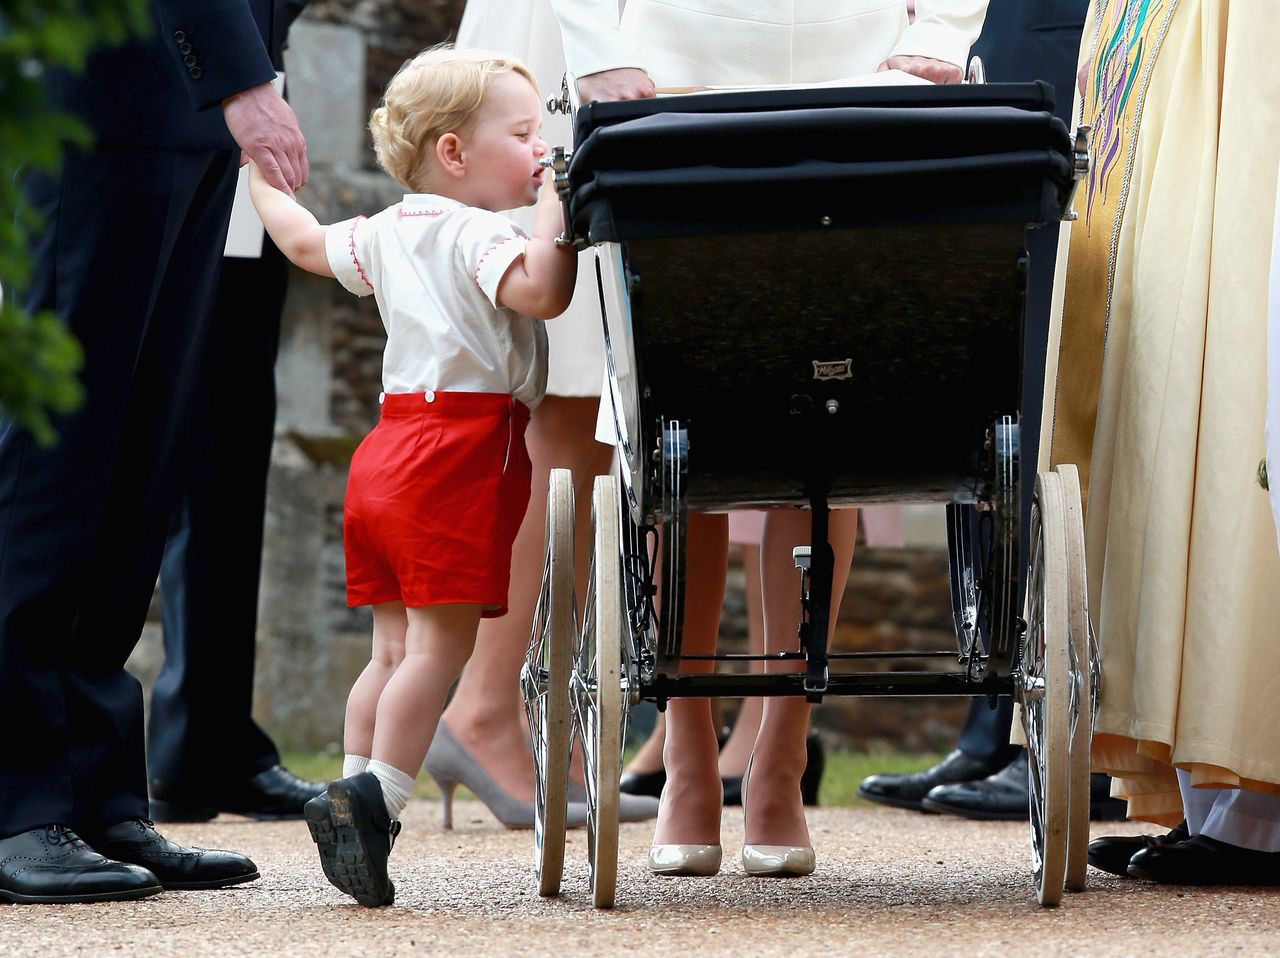 Prince George looks in Princess Charlotte's pram at her christening. Jackson: 'I just capture these sweet moments'.